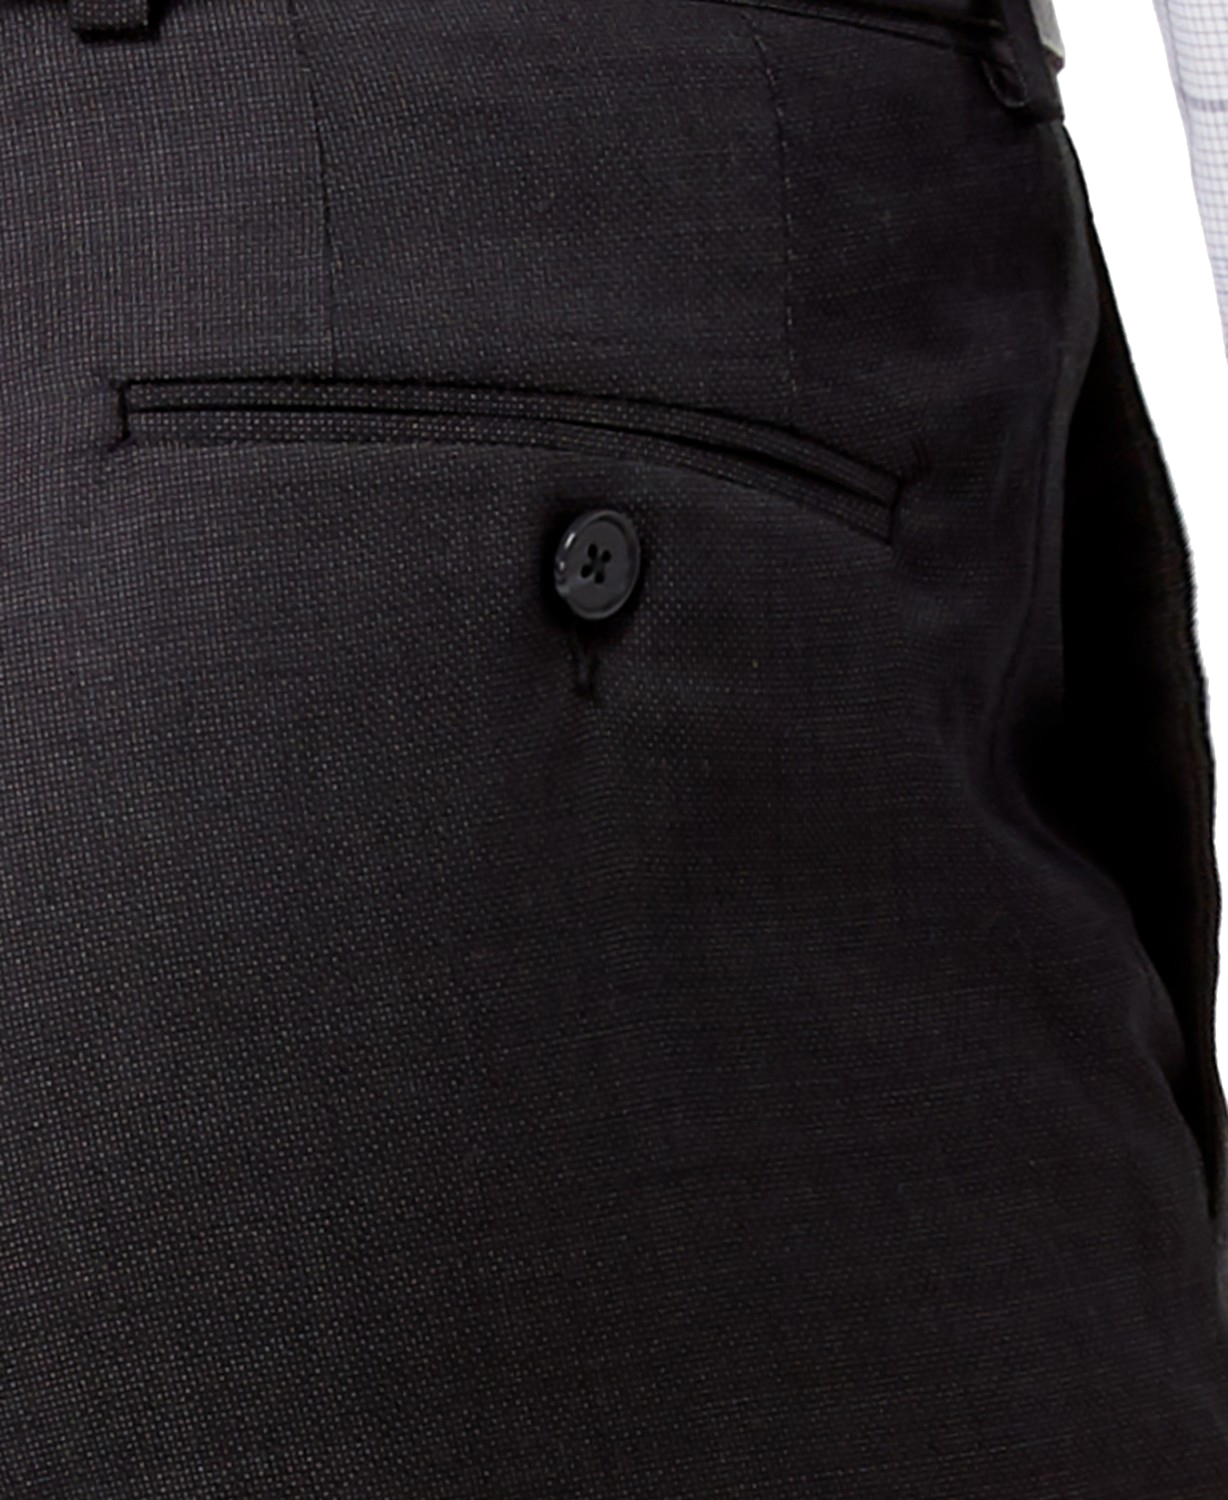 www.couturepoint.com-dkny-mens-black-wool-modern-fit-stretch-textured-suit-pants